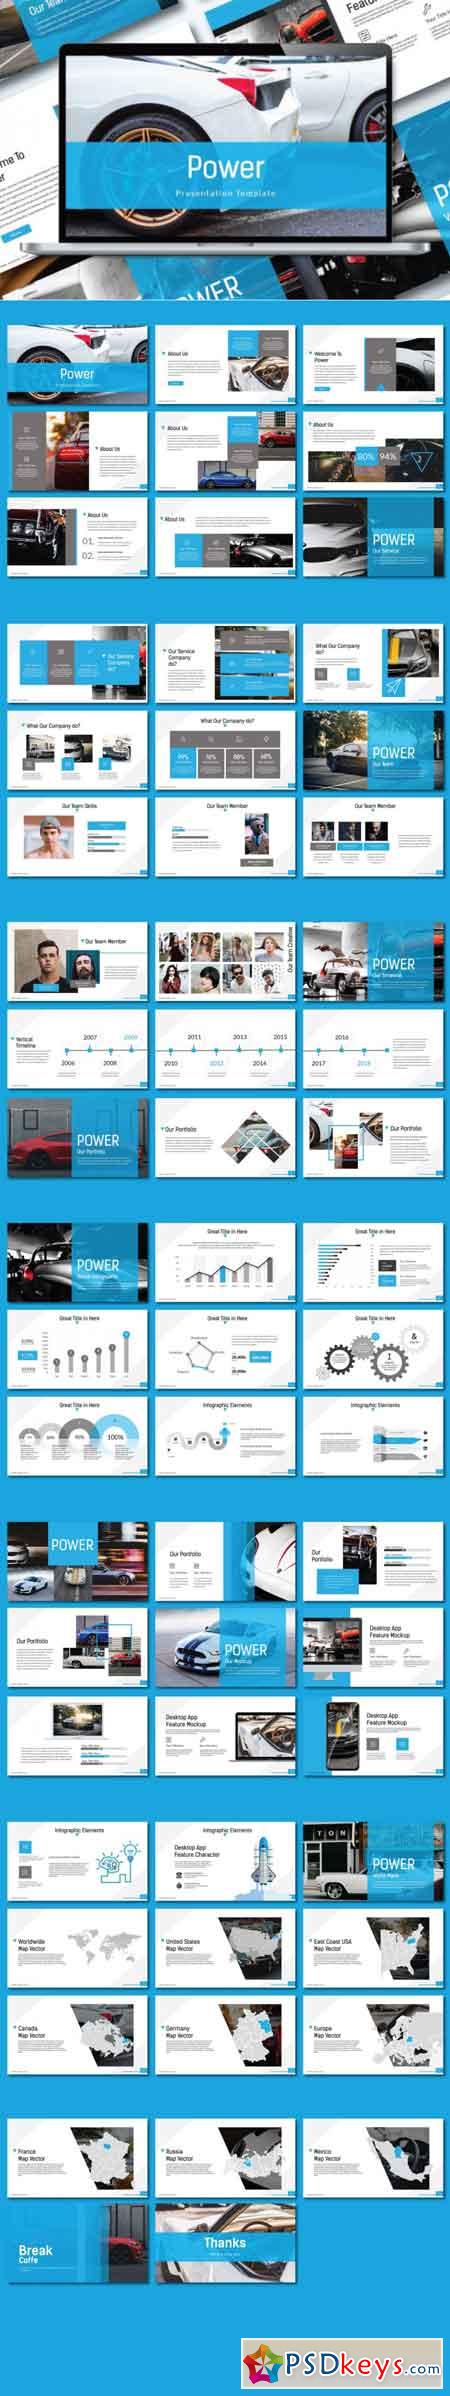 Power - Powerpoint Template